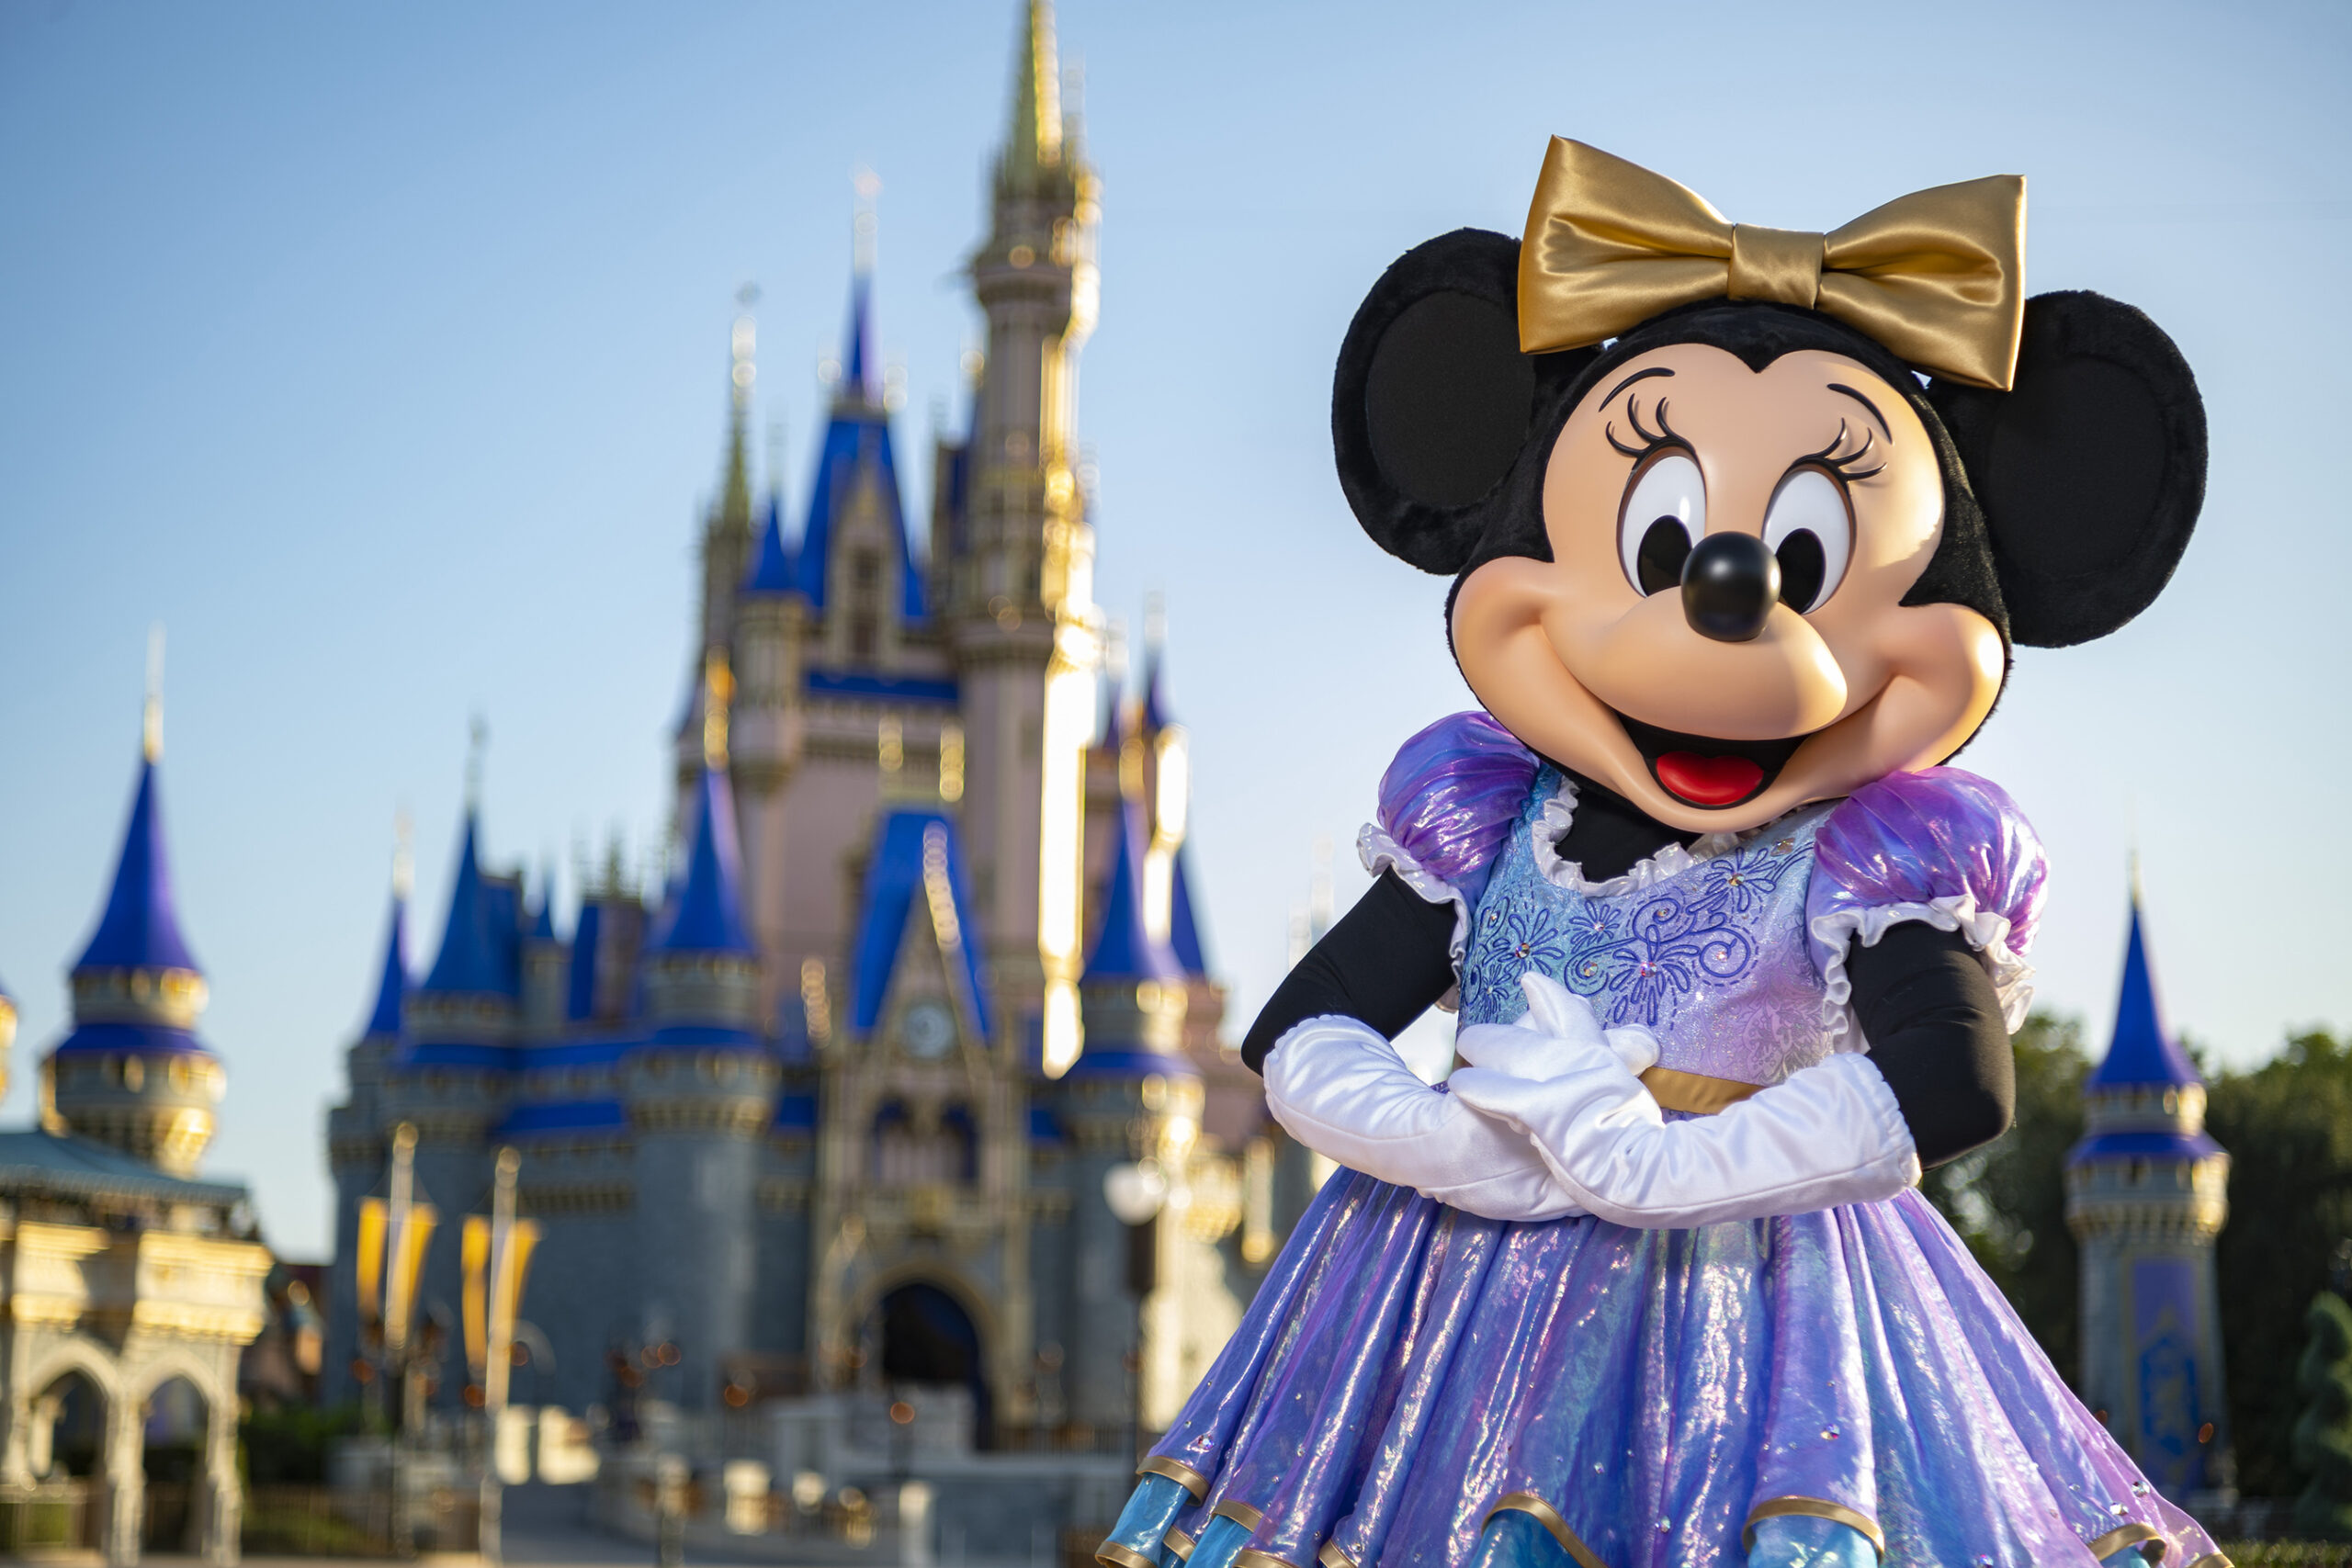 A closer look at Mickey & Minnie's 50th Anniversary outfits